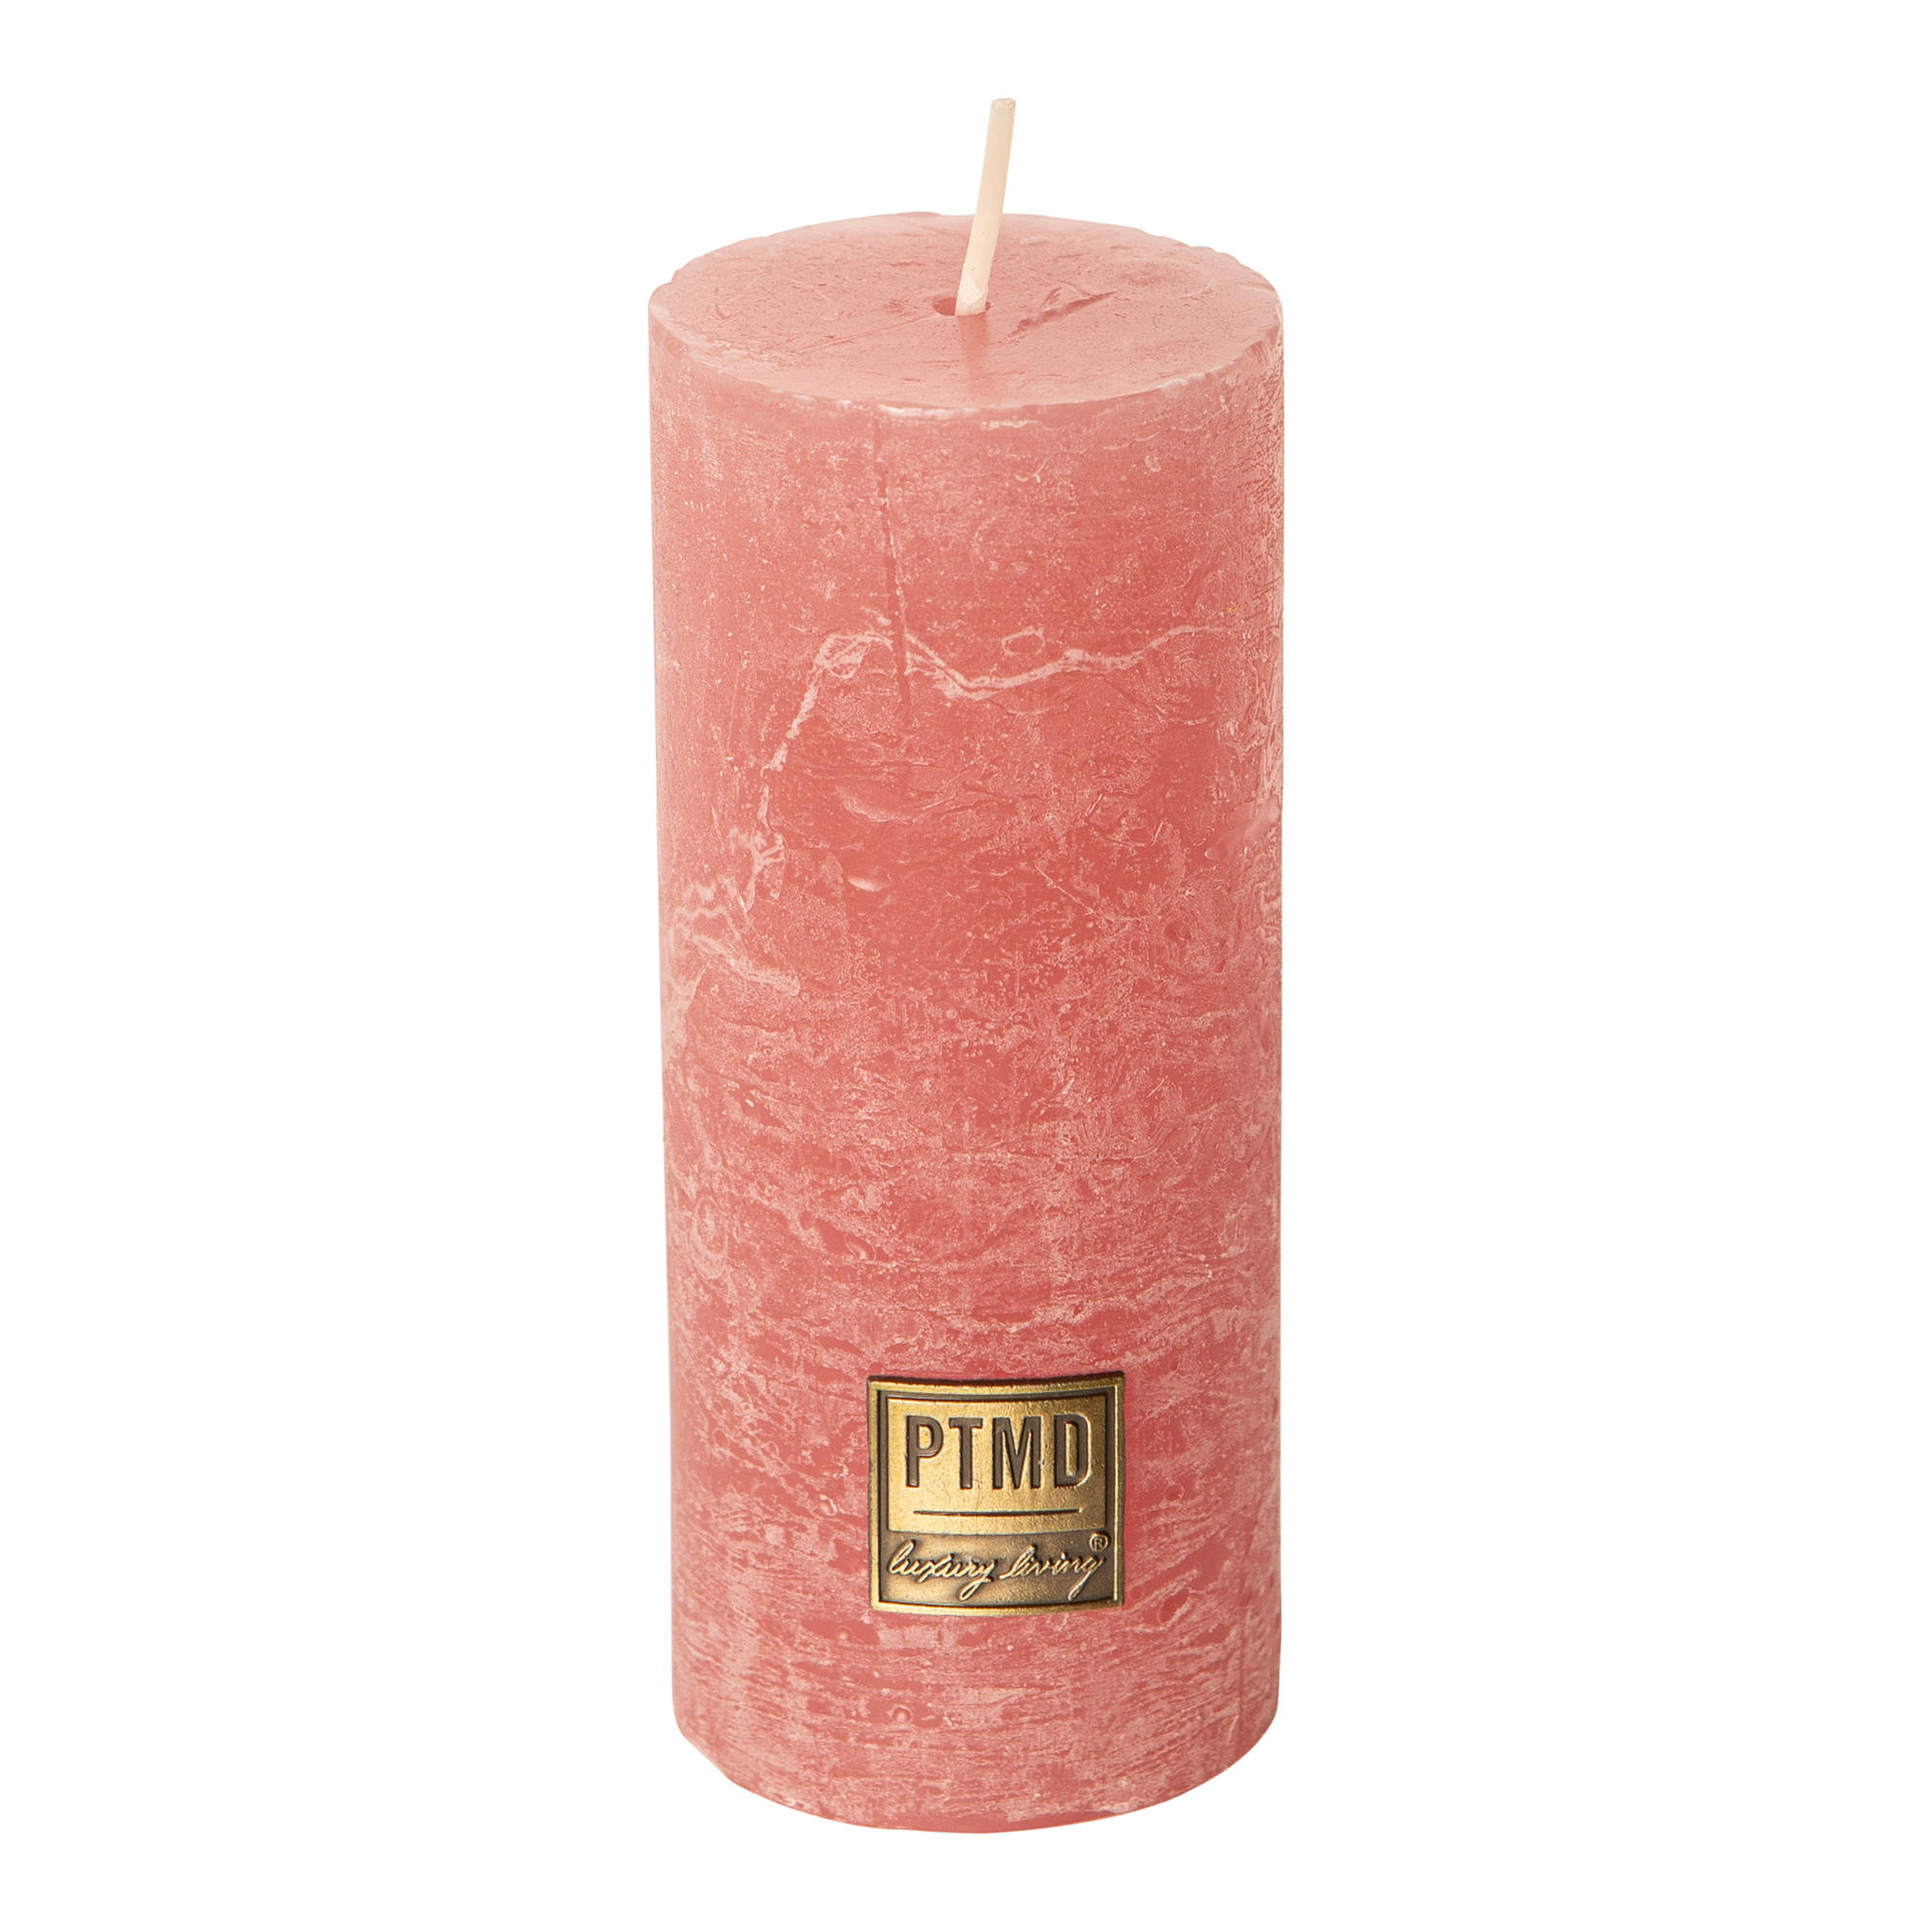 PTMD 10 x 7cm Blush Pink Rustic Pillar Candle